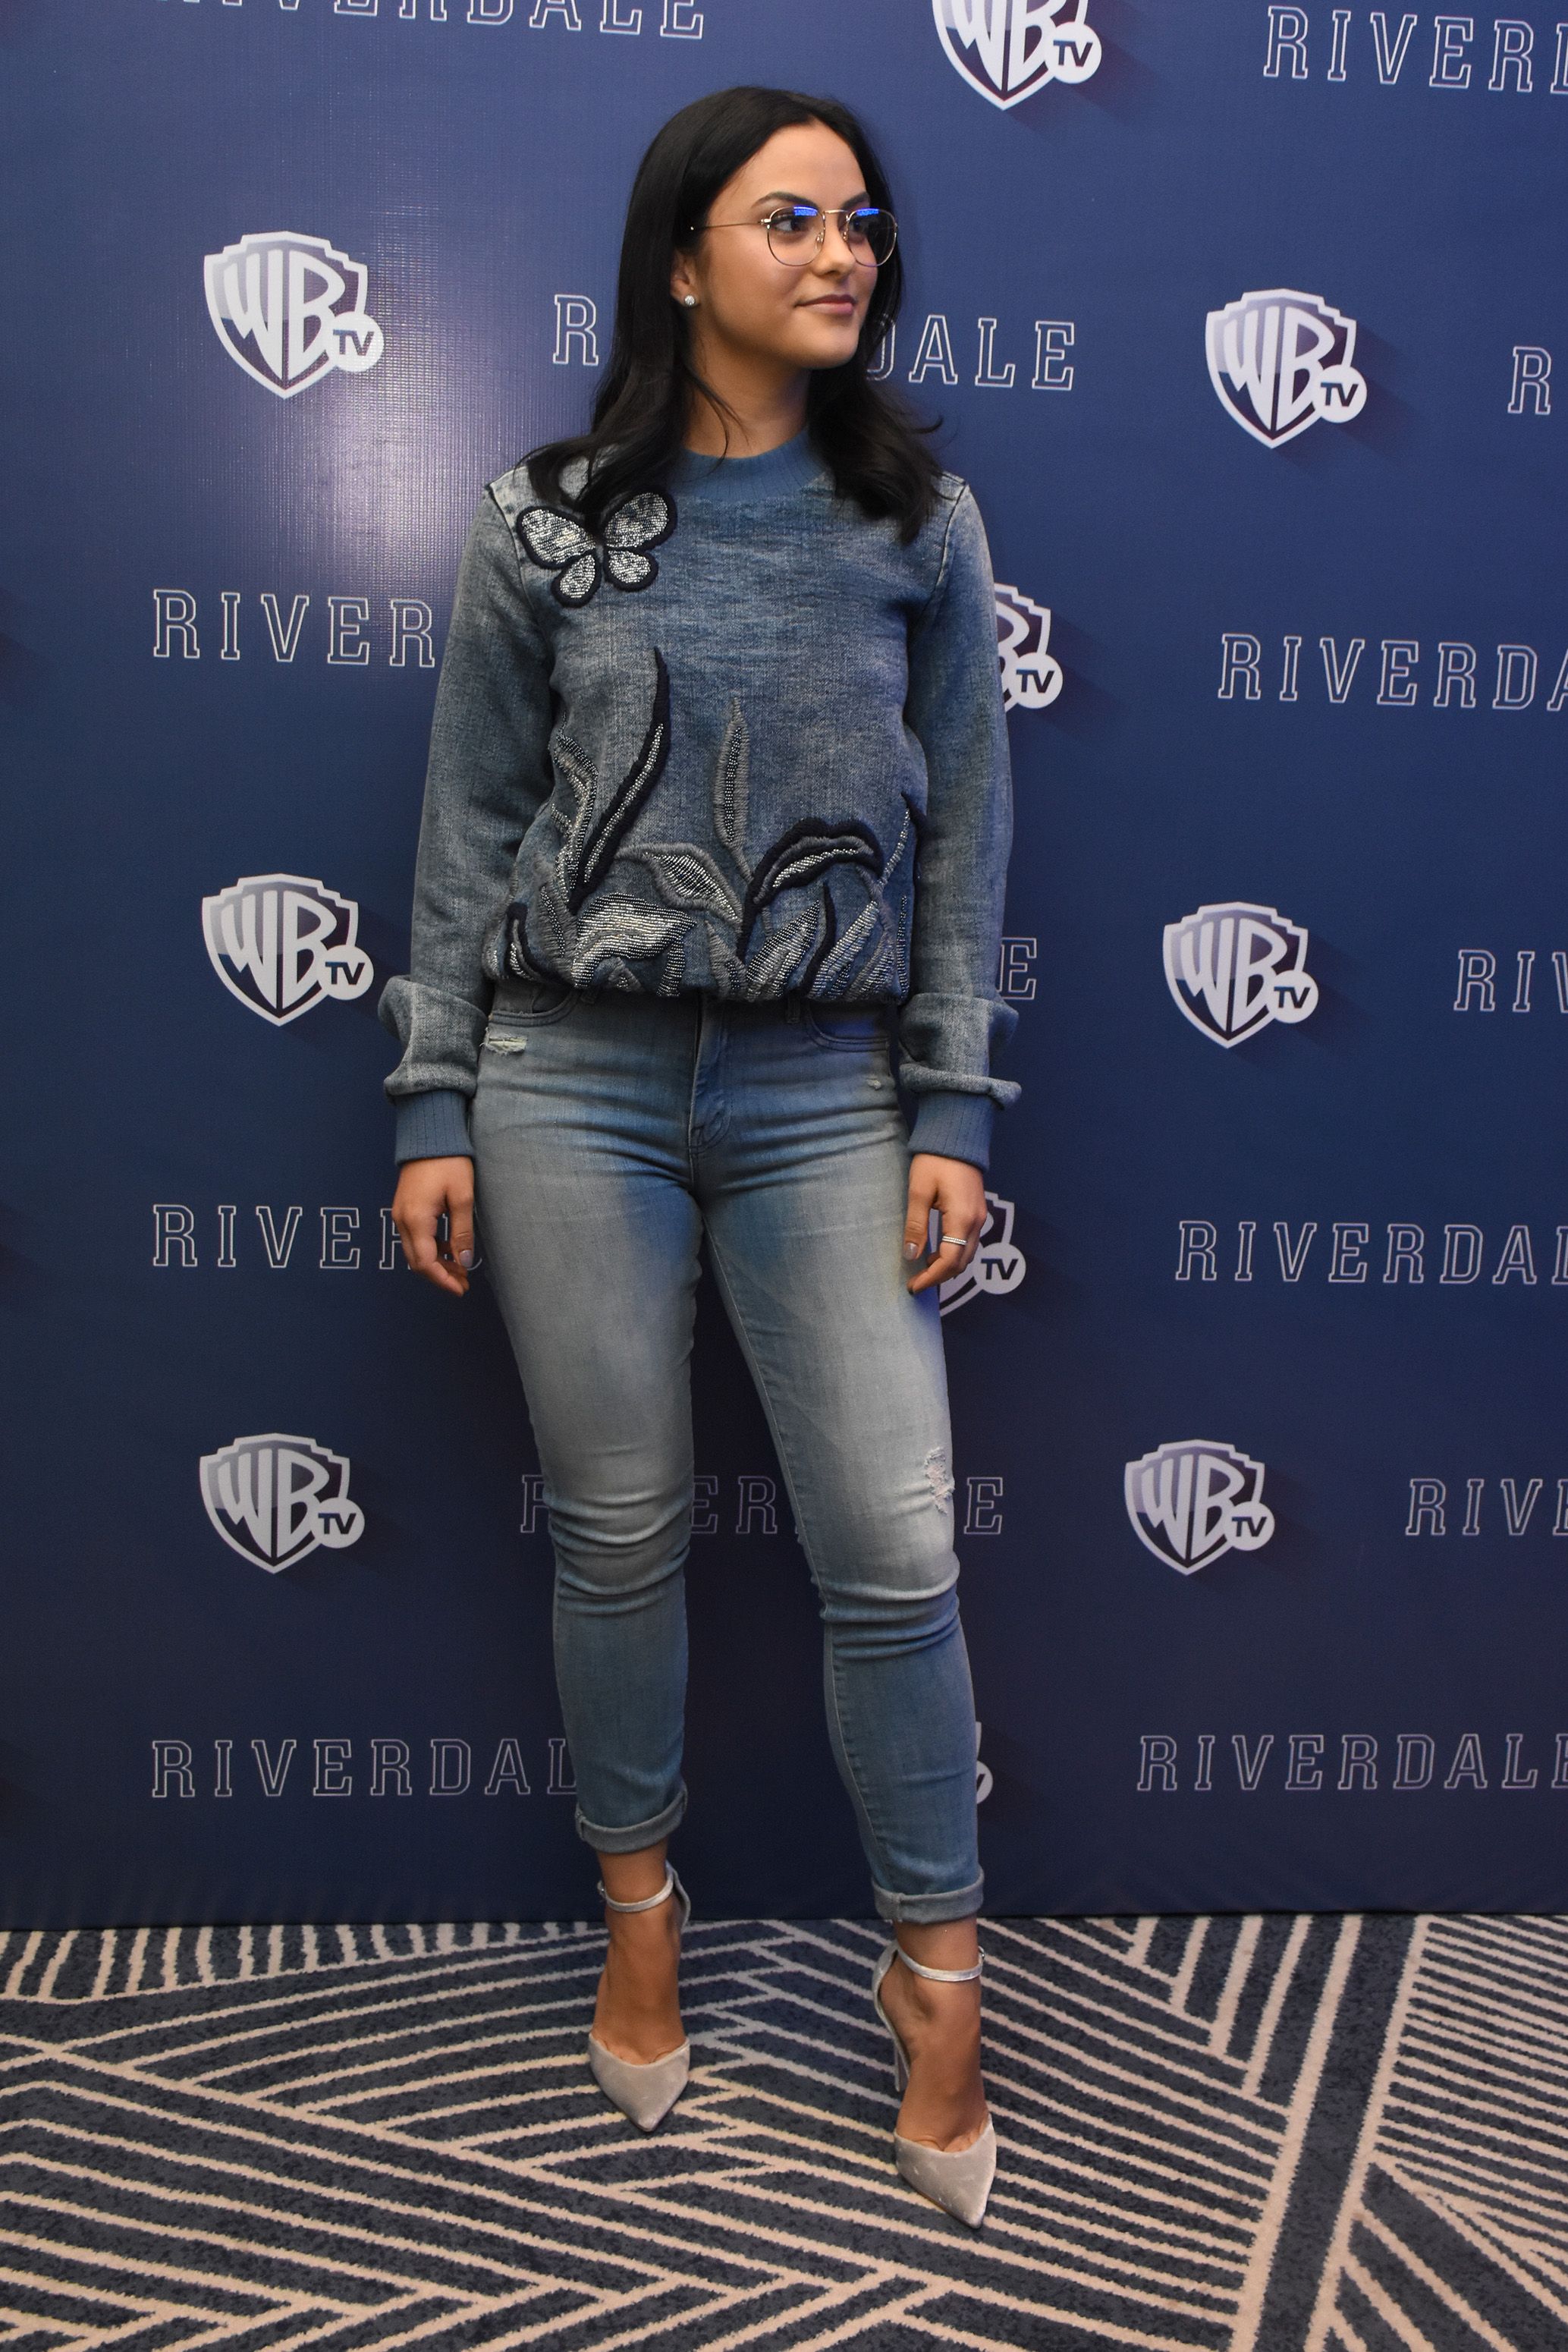 Riverdale's Camila Mendes' Best Outfits - Cami Mendes Fashion and